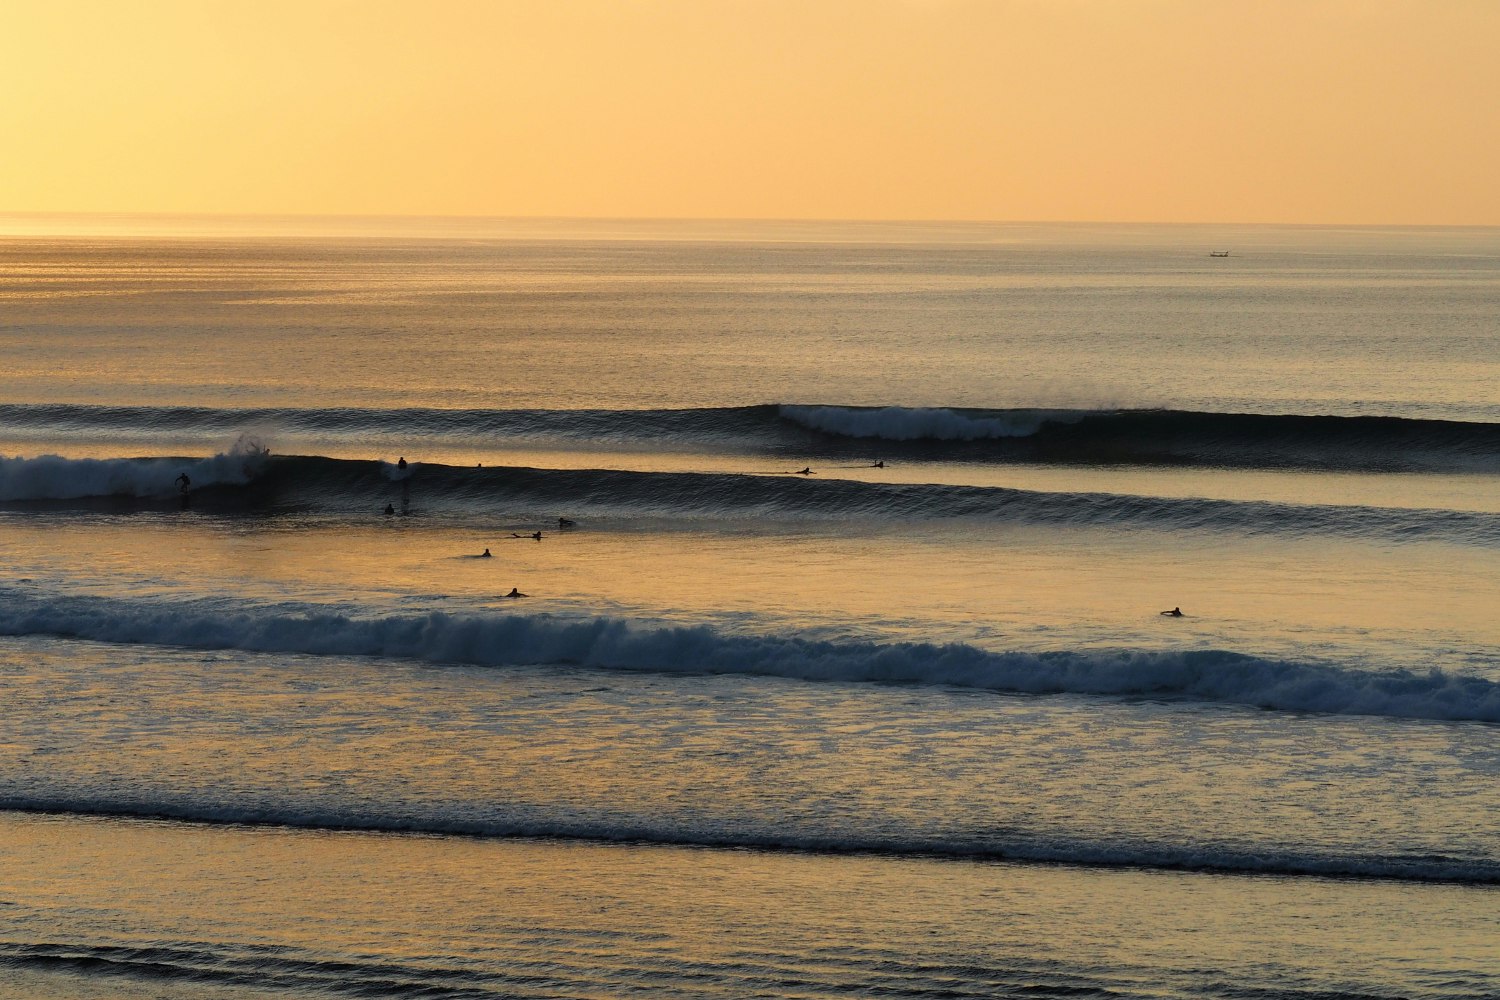 Surfers catch their last waves of the day as the sun sets over the horizon at Bingin, Bali